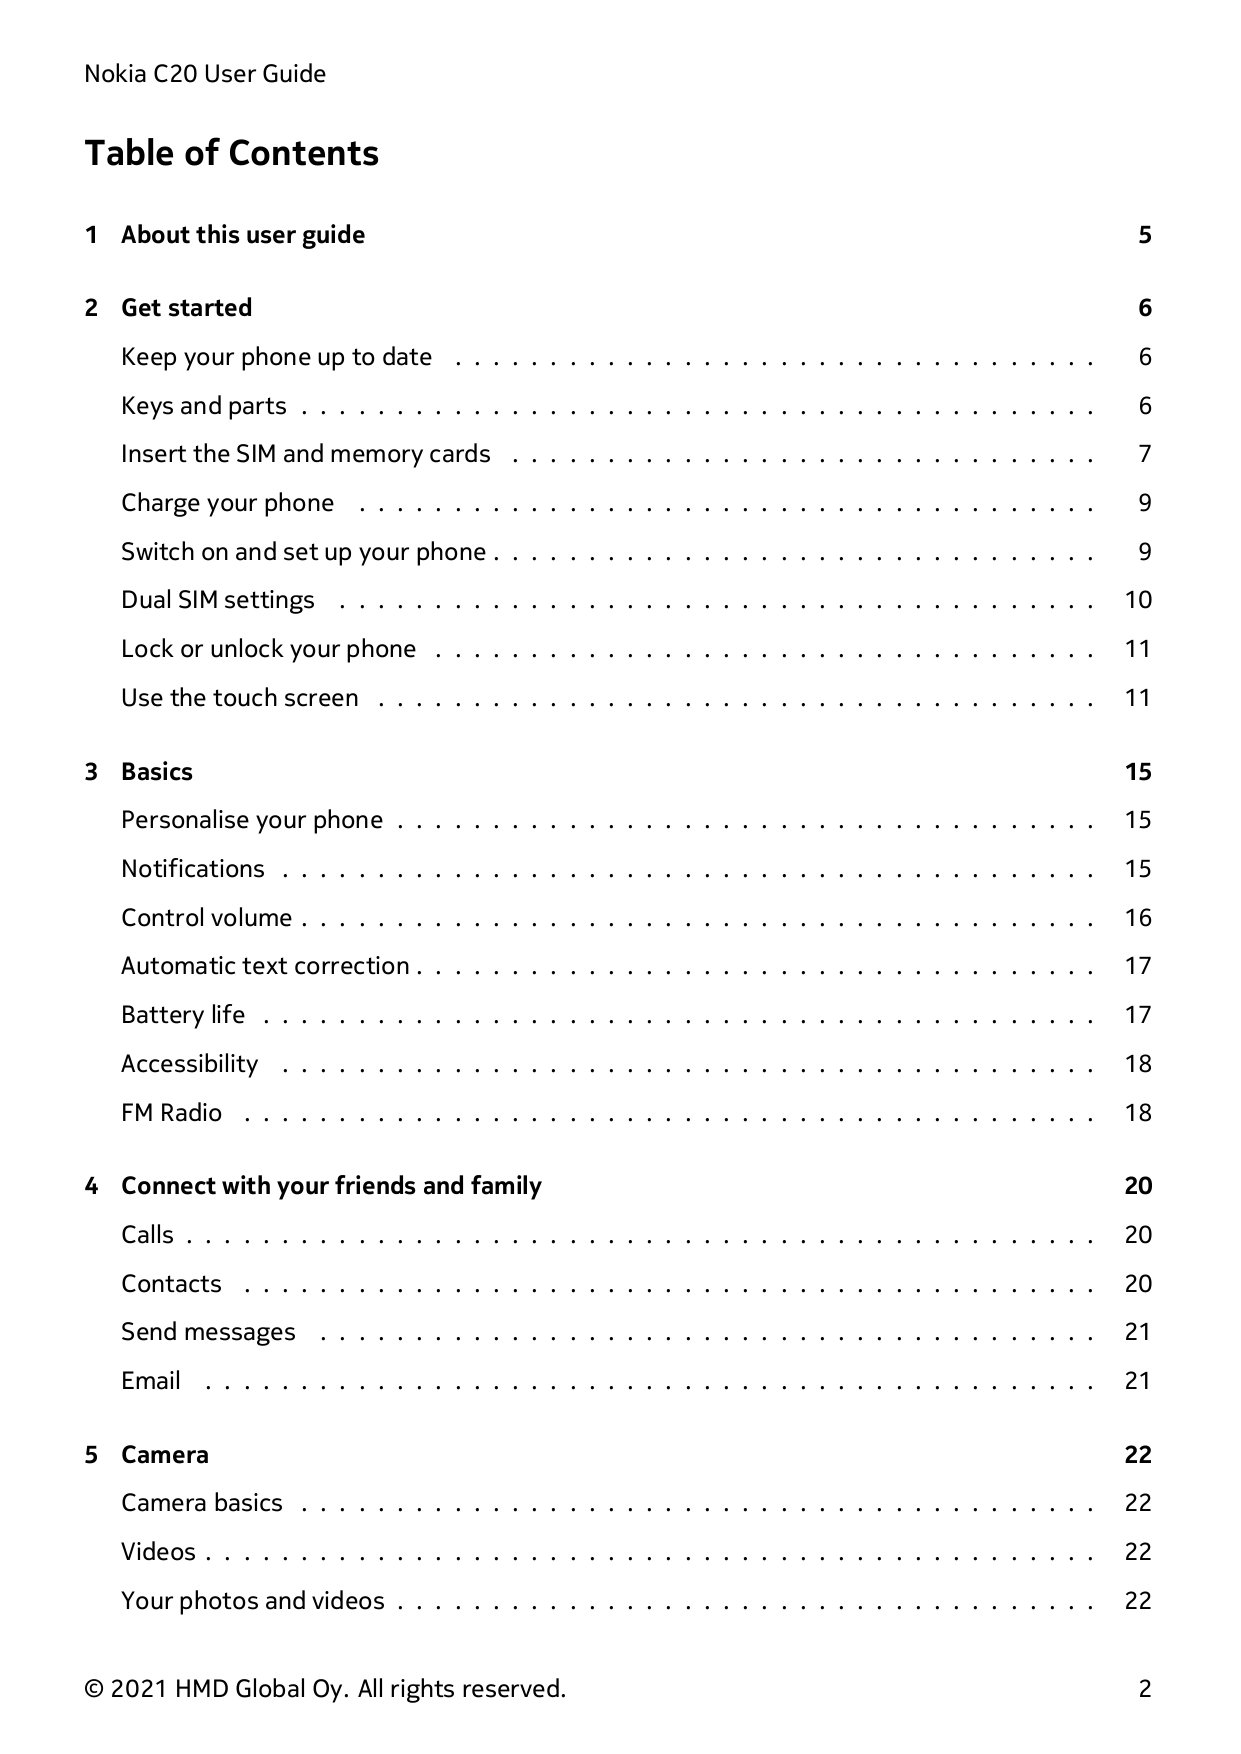 Nokia C20 User GuideTable of Contents1 About this user guide52 Get started6Keep your phone up to date . . . . . . . . . . . . . 